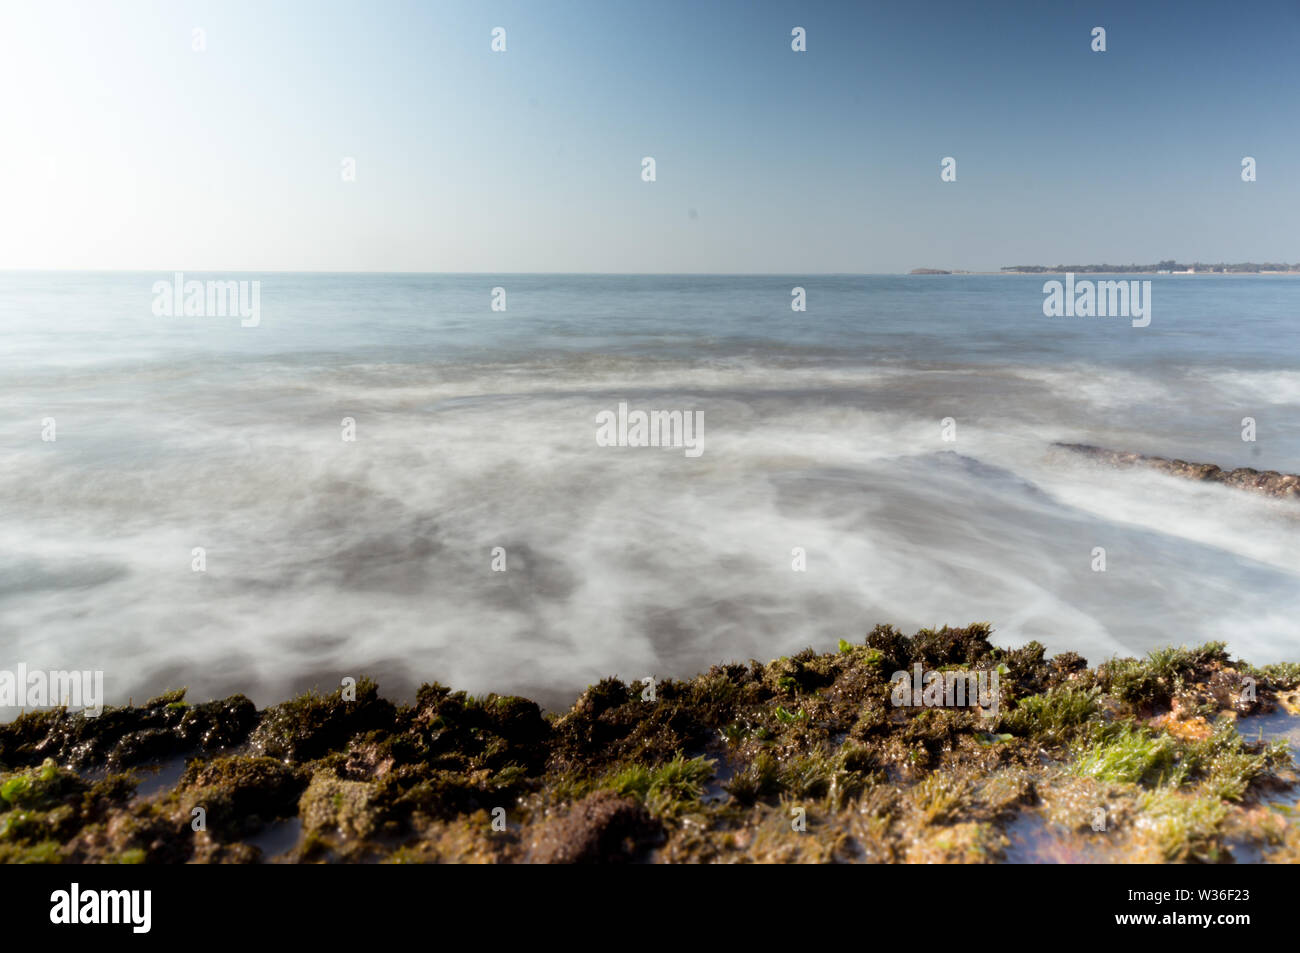 Long exposure of rocky beach with blurred waves and moss covered rocks Stock Photo